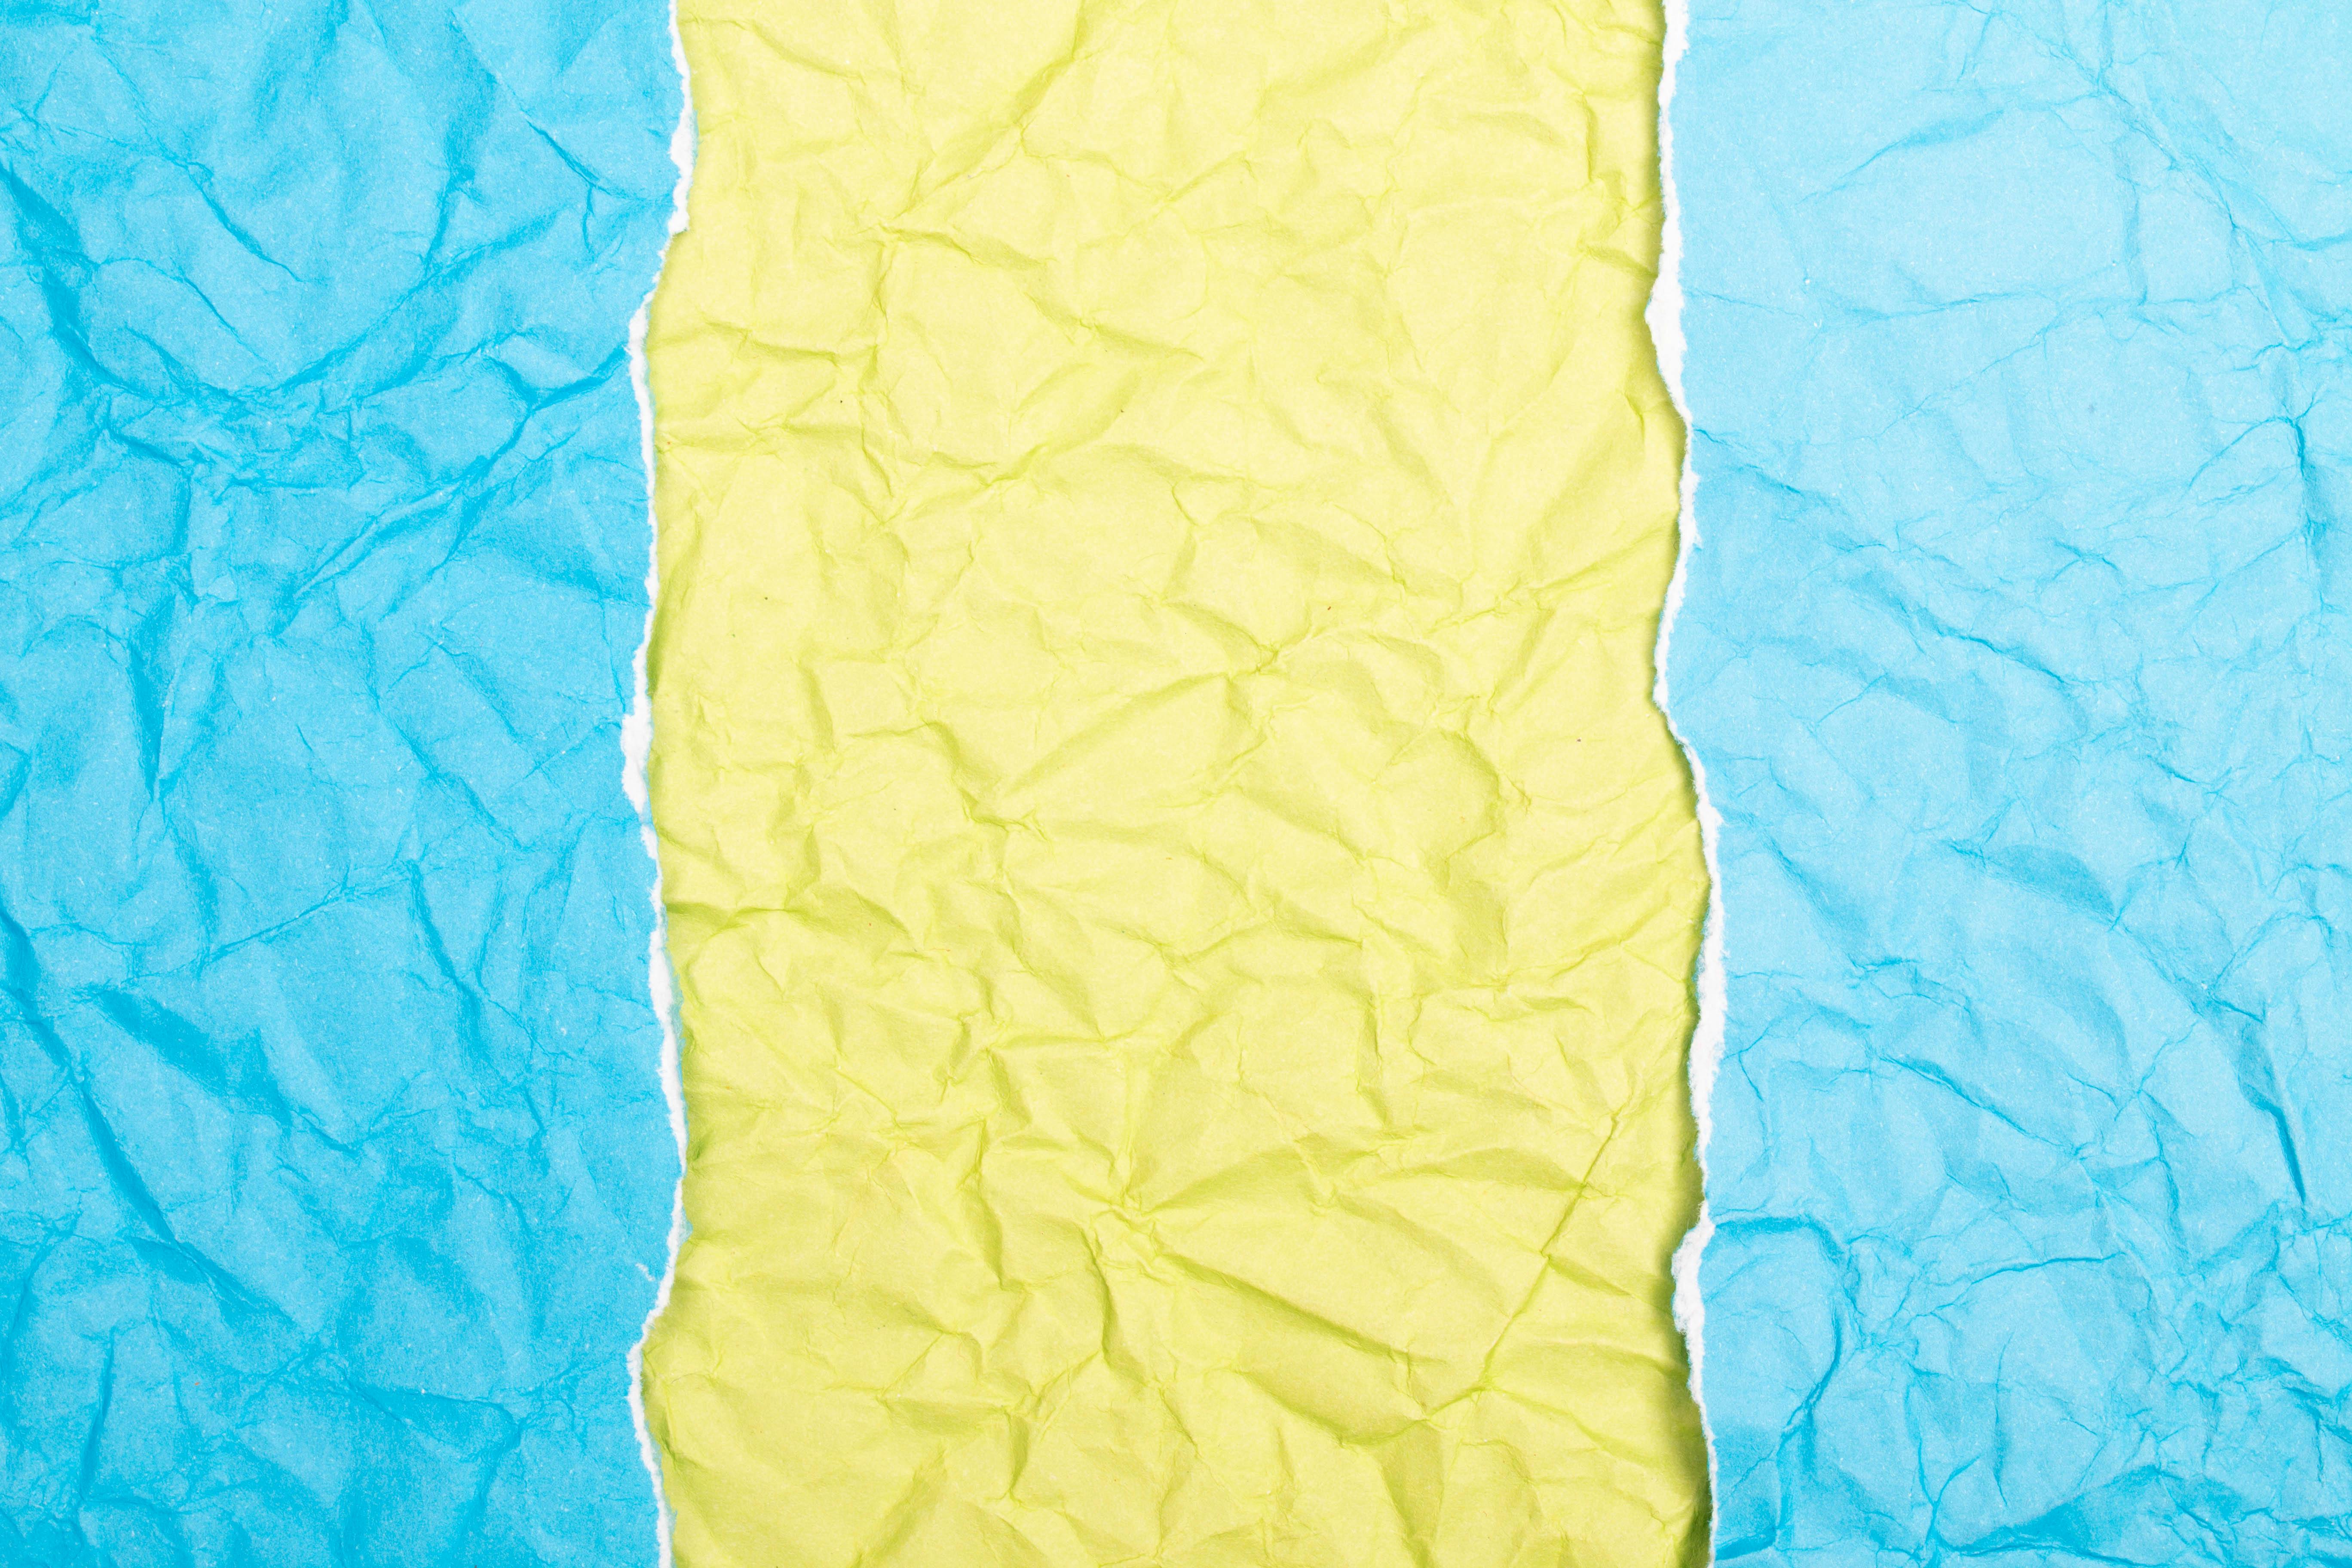 A Close-Up Shot of a Crumpled Yellow Paper · Free Stock Photo